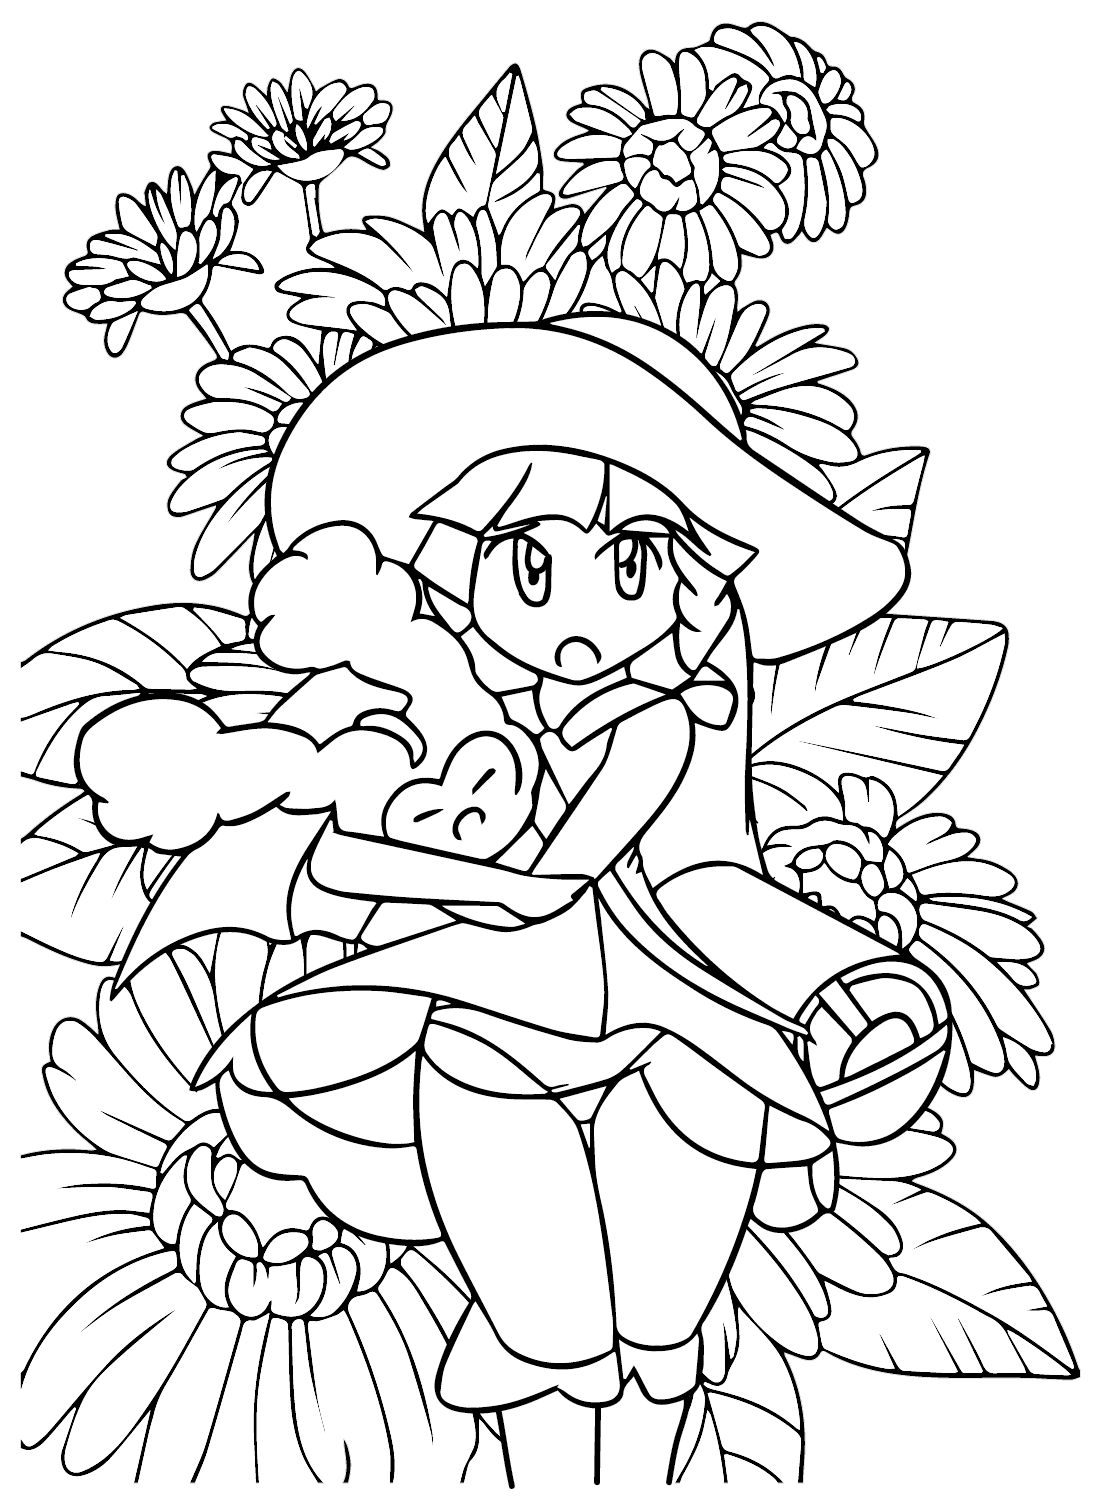 Lillie Pokemon Coloring Pages to Download from Lillie Pokemon